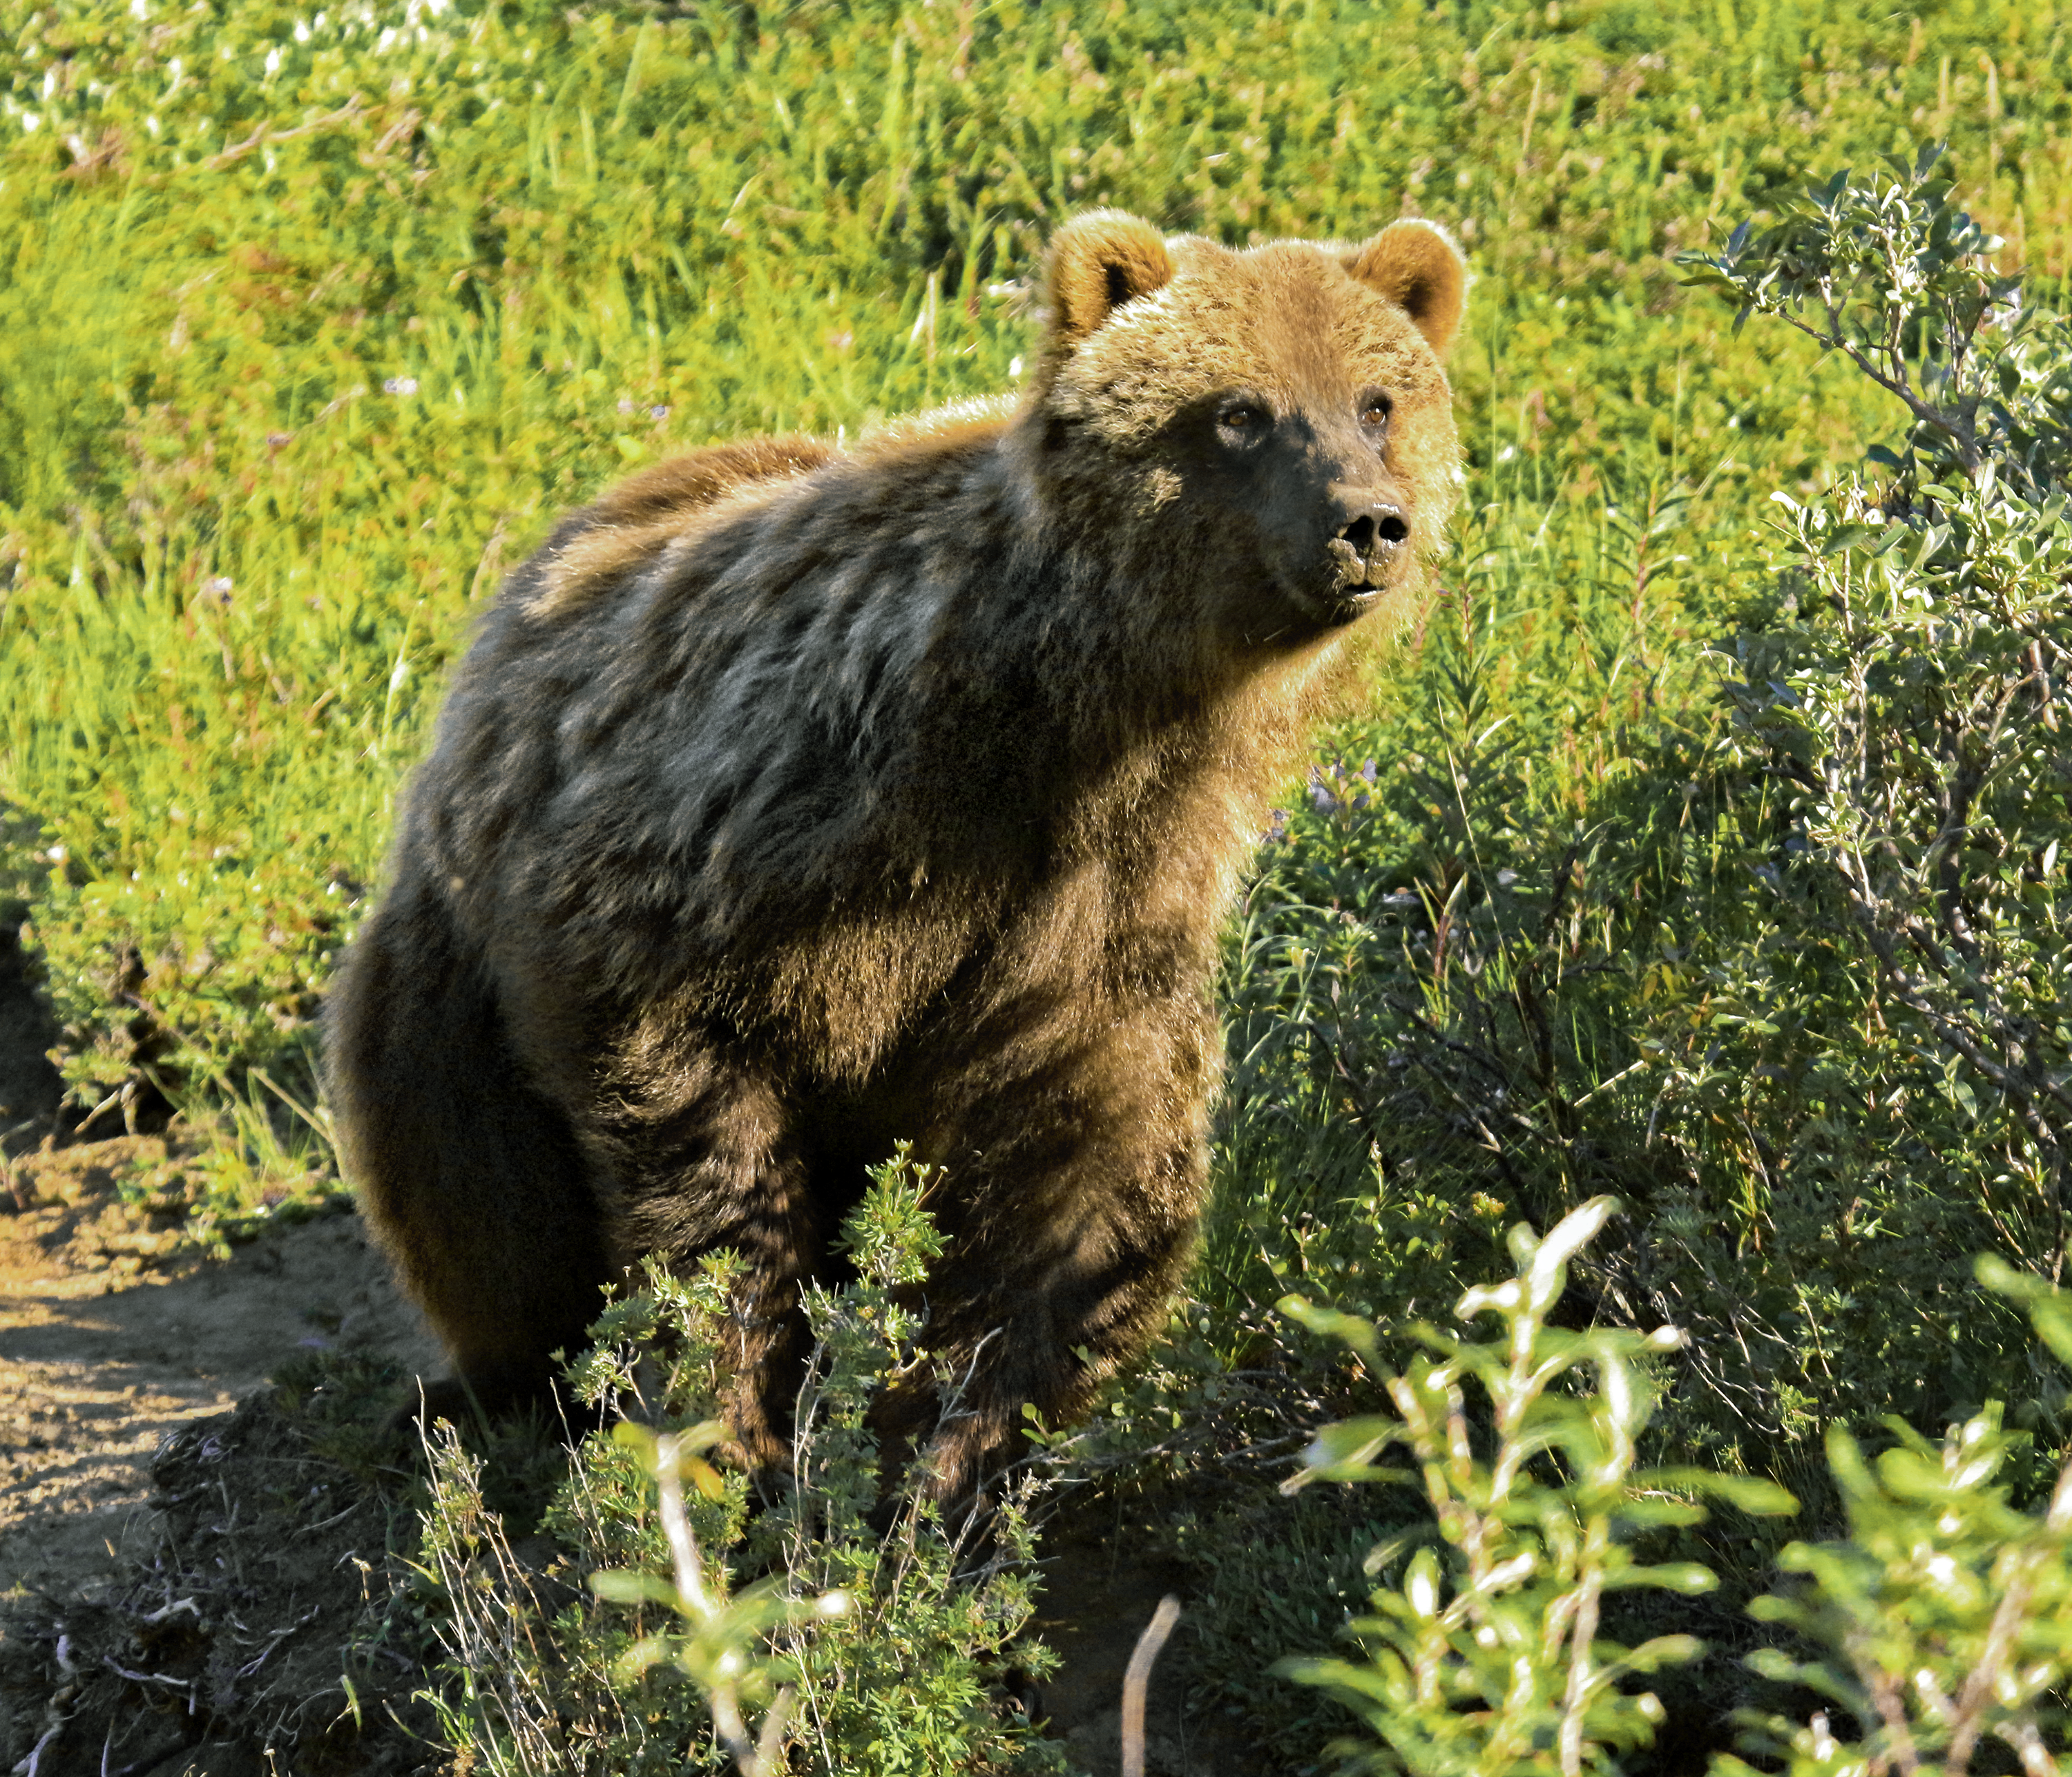 File:Wild grizzly bear in Alaska.png - Wikipedia